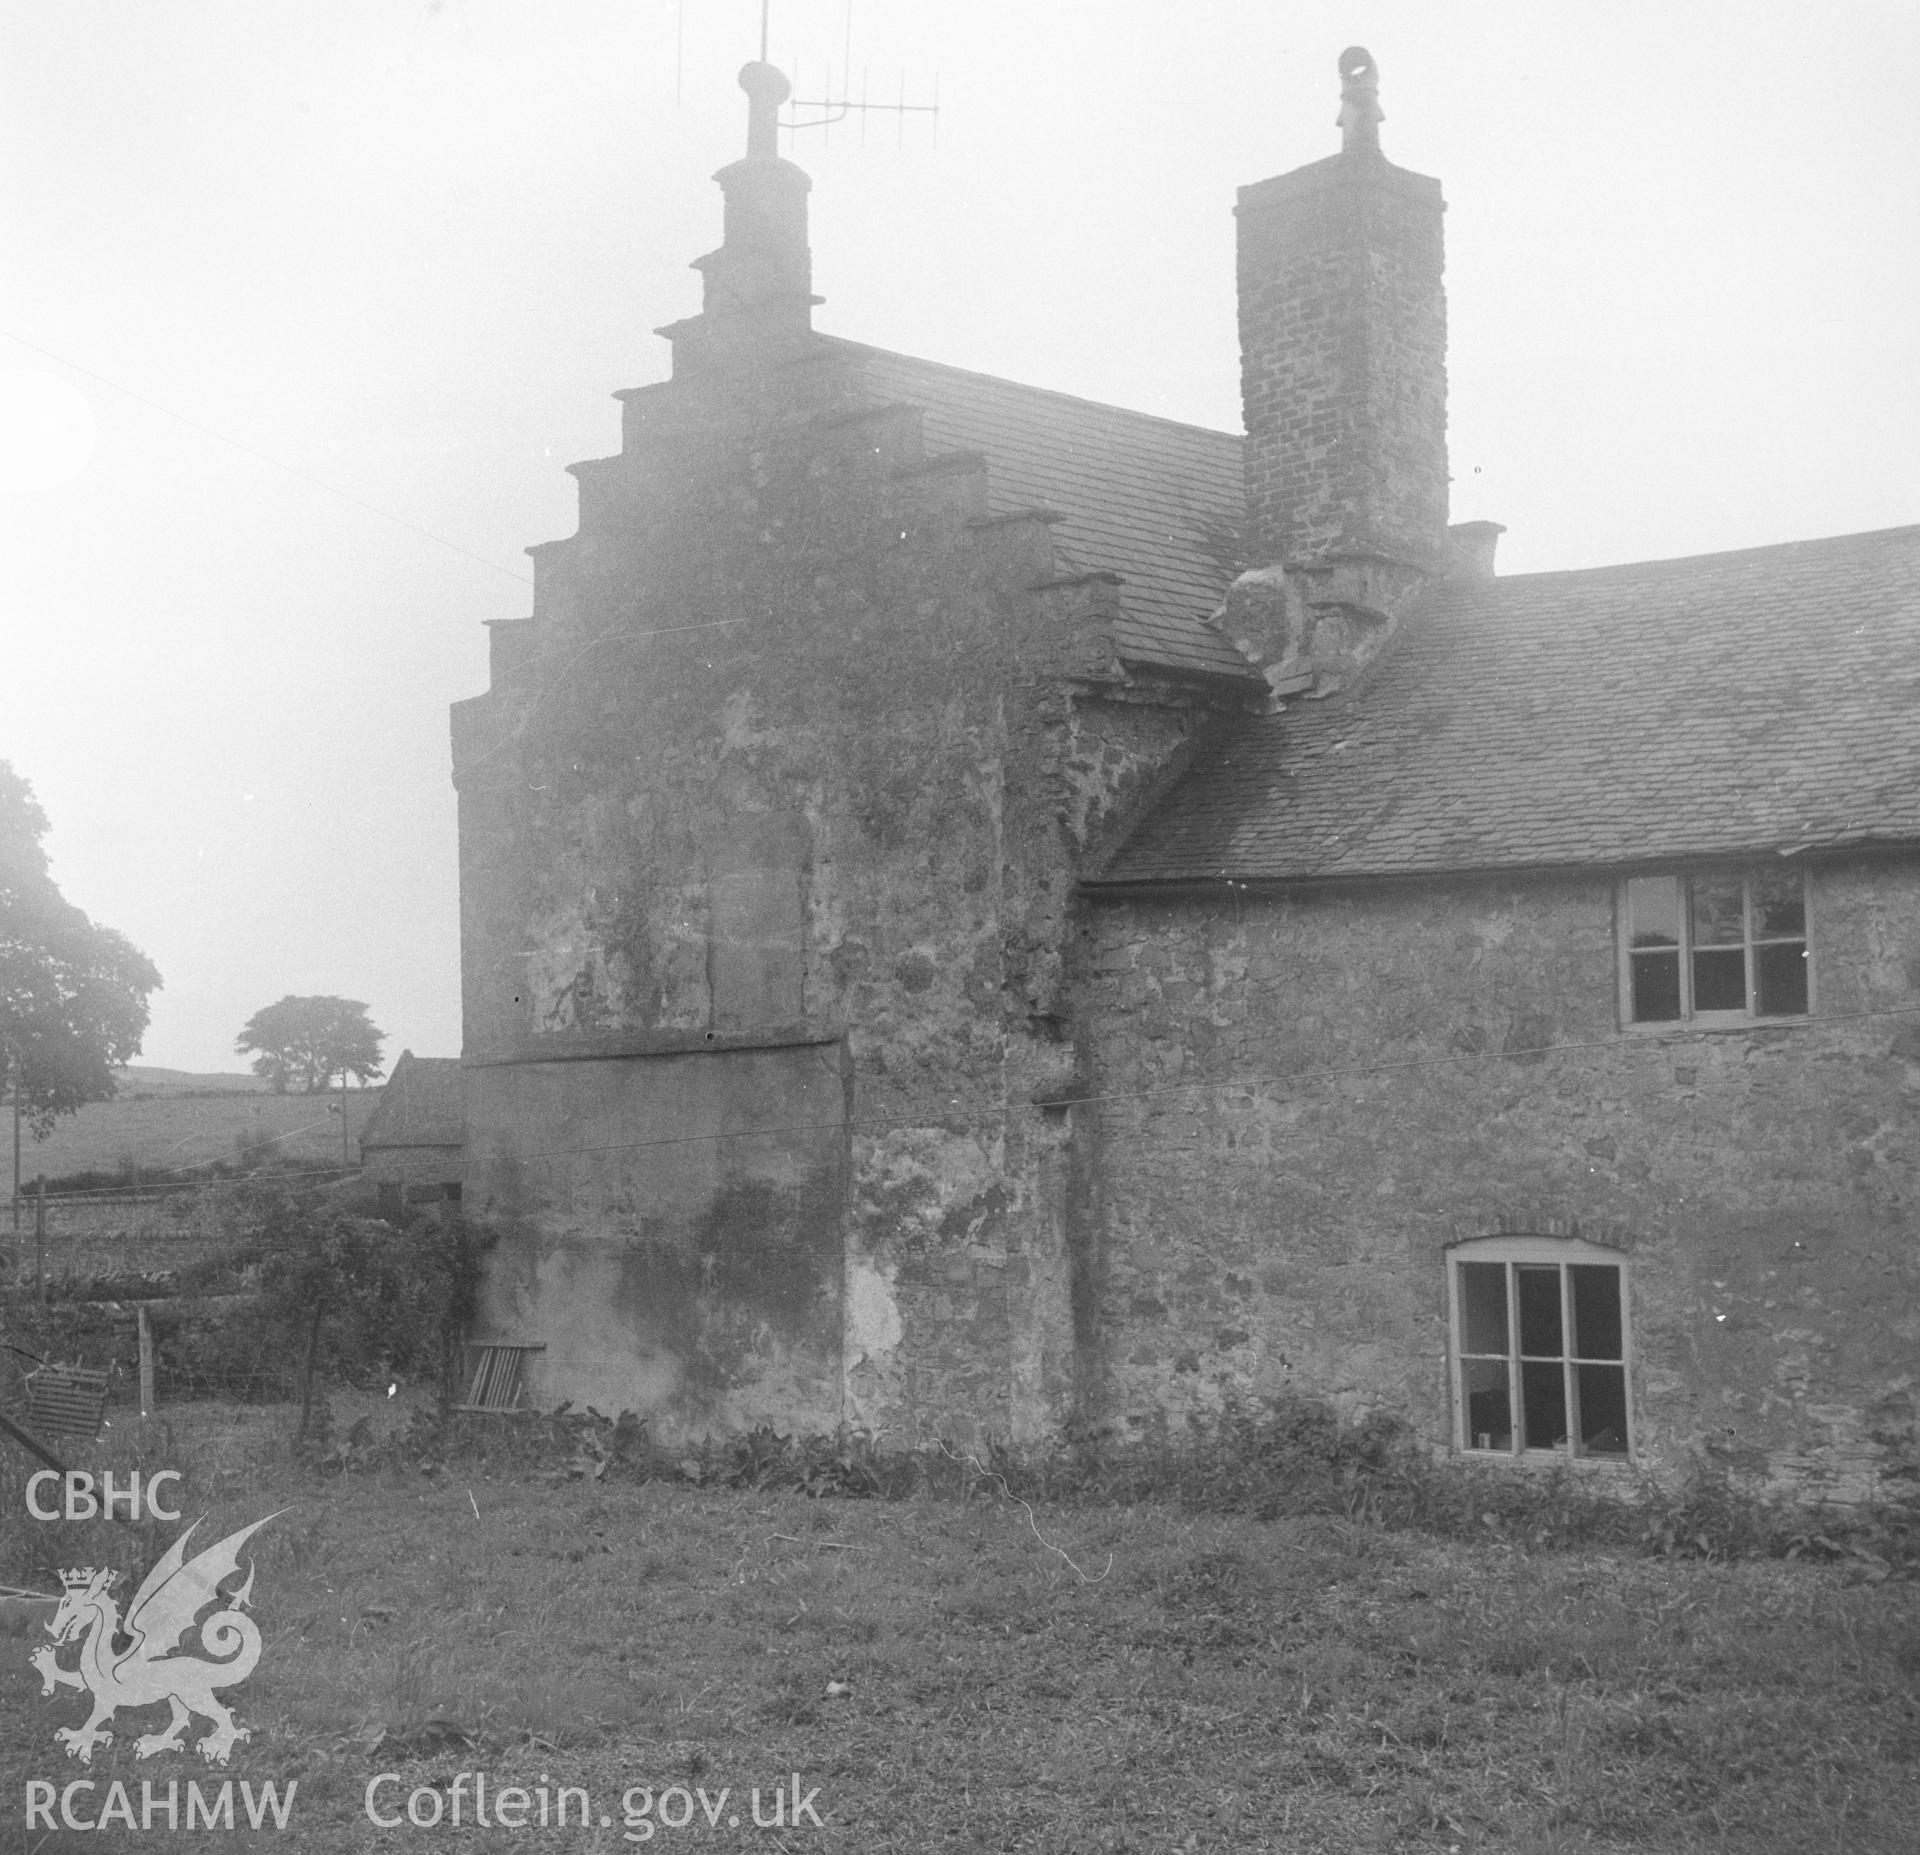 Digital copy of a black and white nitrate negative showing exterior view of Pwllhalog Farmhouse, Cwm.